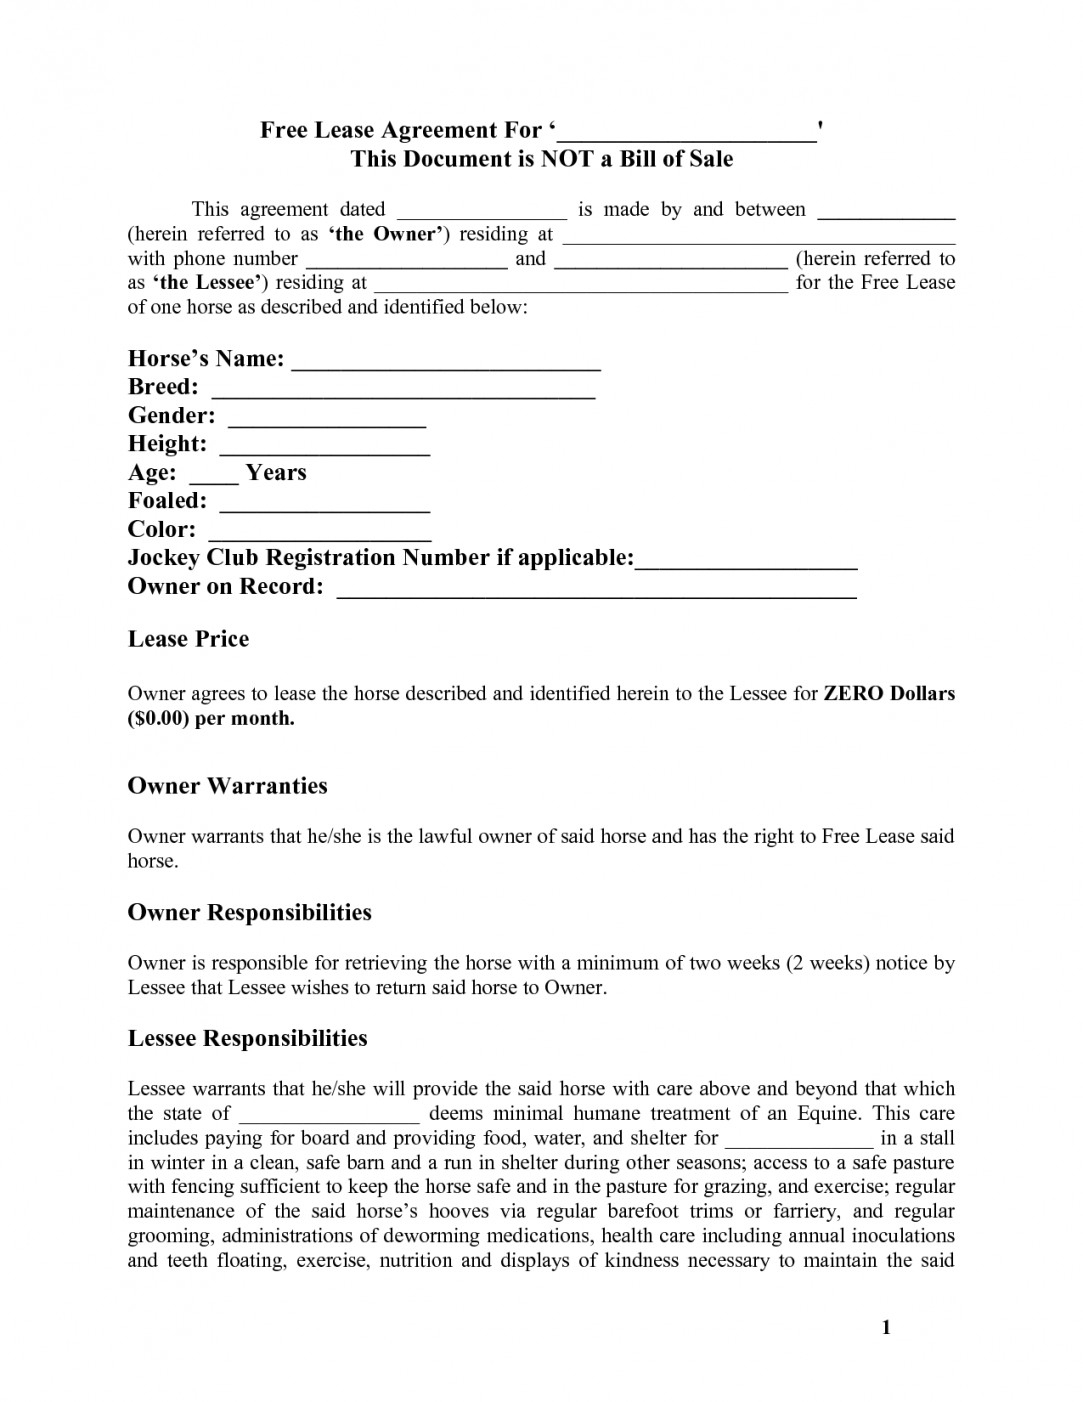 Vehicle Lease Agreement Template Free | Lostranquillos - Free Printable Vehicle Lease Agreement